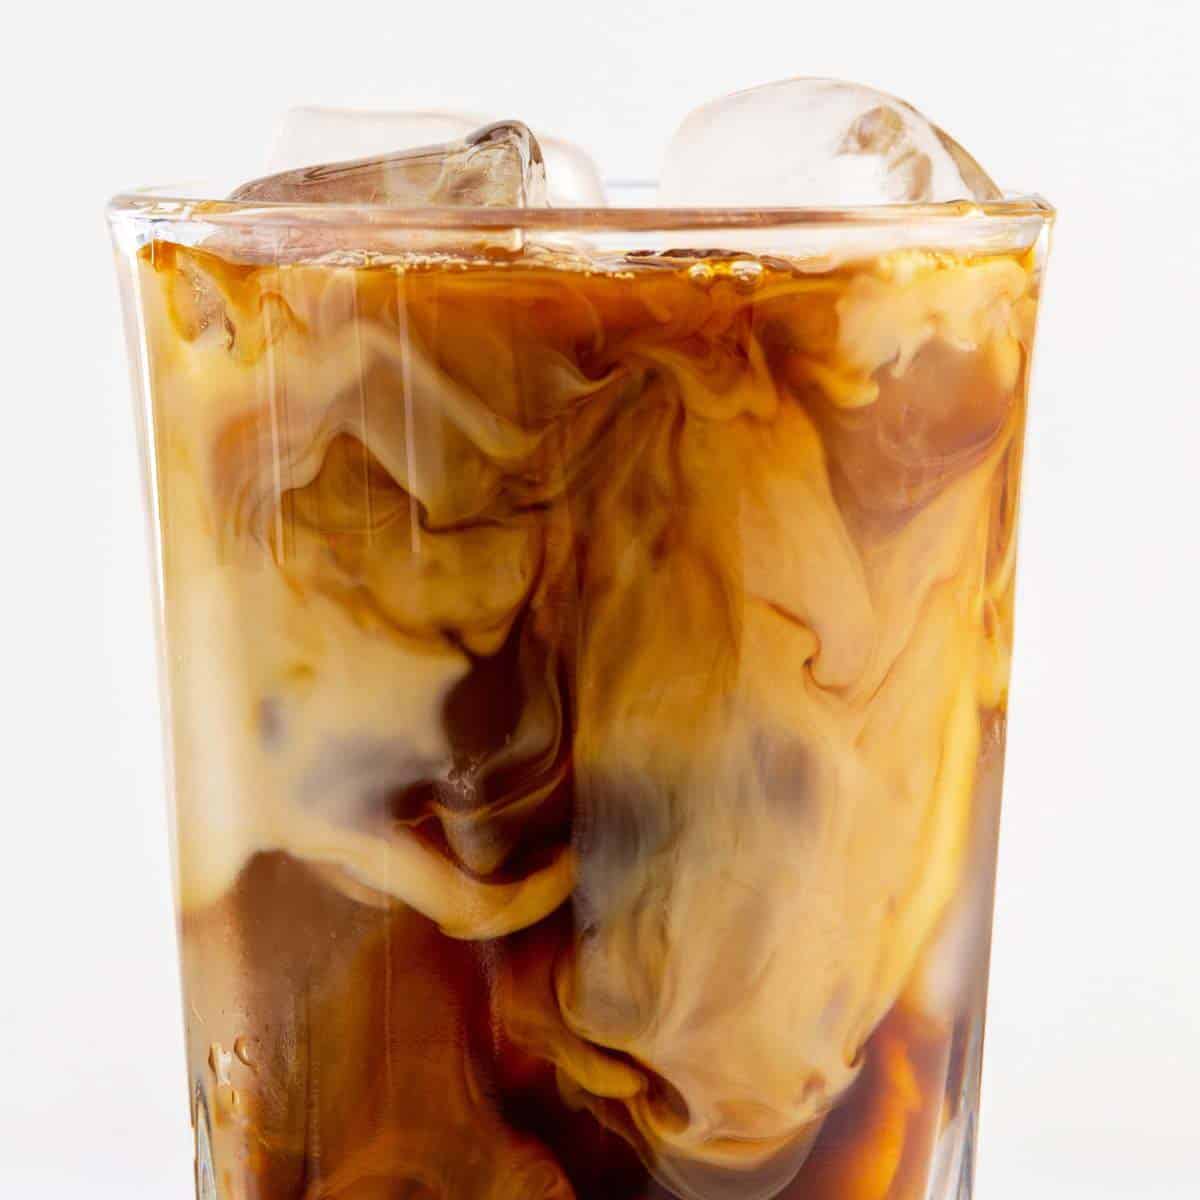 A glass filled with iced coffee and ice.